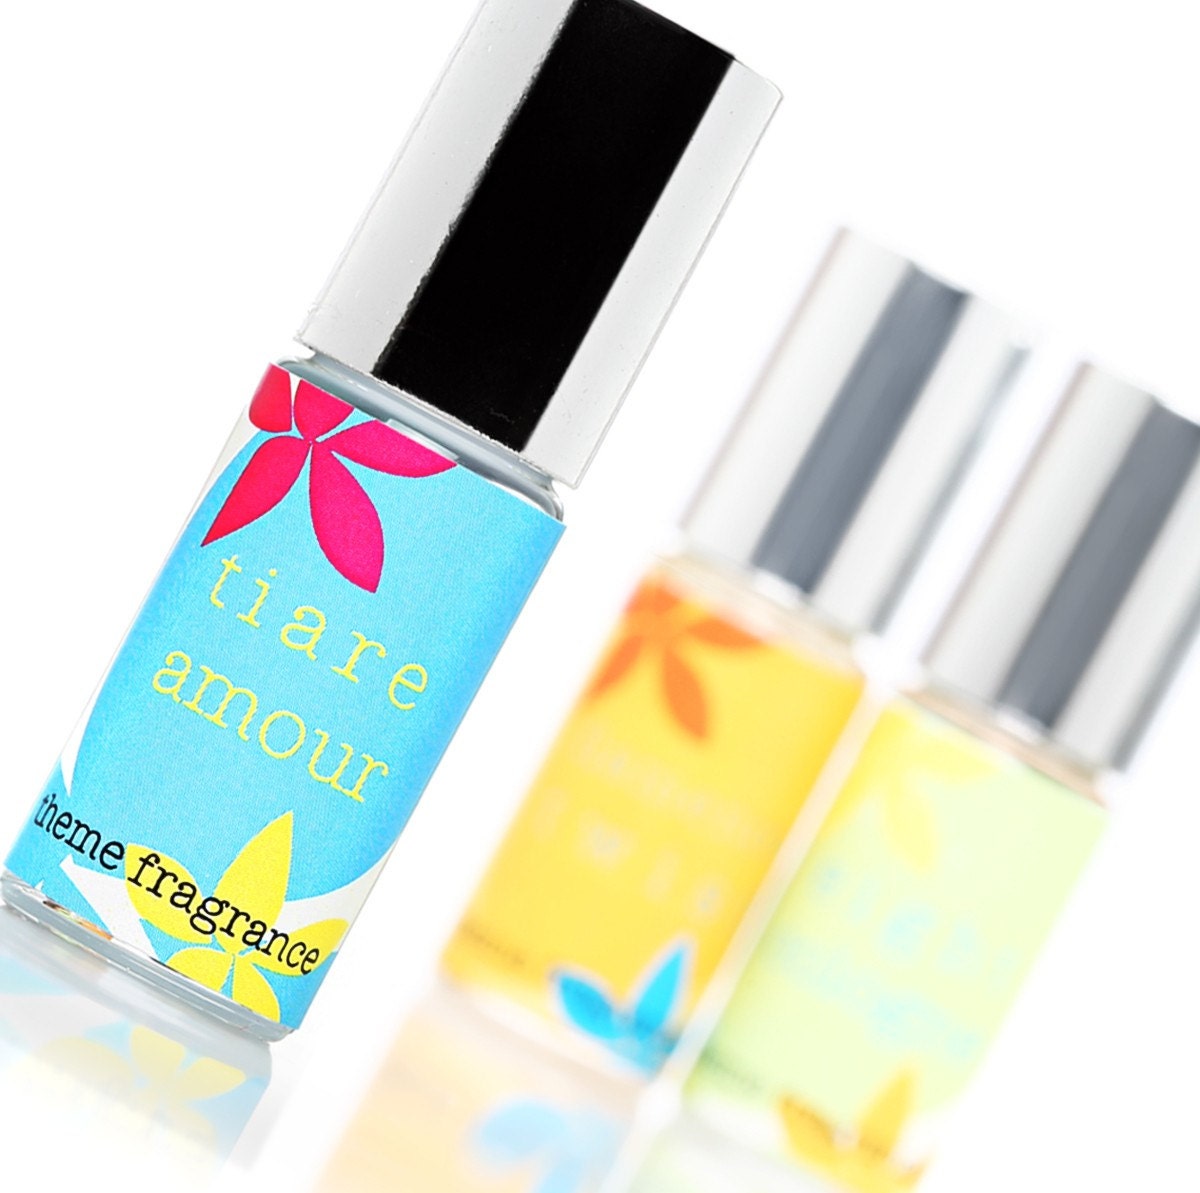 Tiare Amour tm White florals, tropical and spring notes Perfume roll on. Romantic, feminine, soft, but voluptuous.